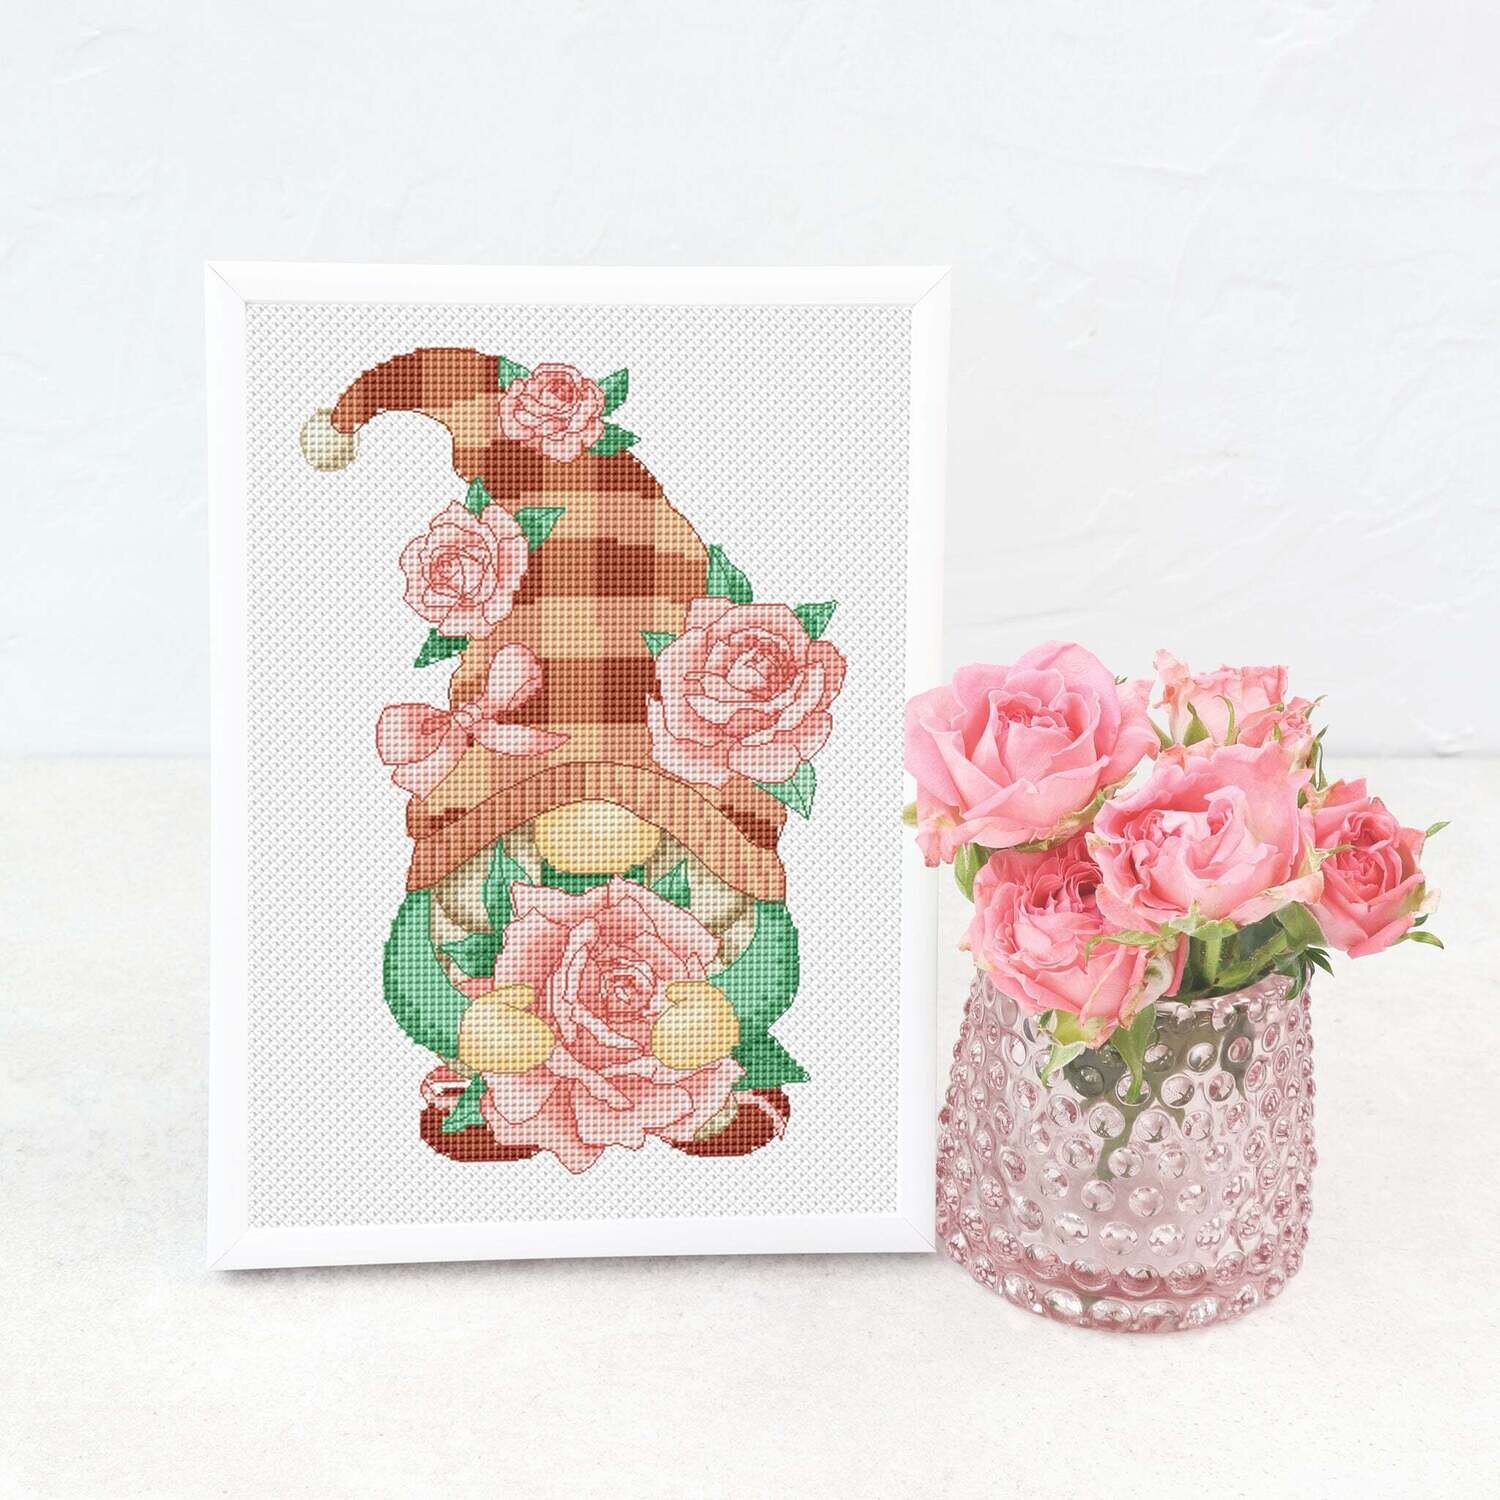 Girl with a pink roses, Cross stitch pattern, Girl cross stitch, Floral cross stitch, Modern cross stitch, Spring cross stitch